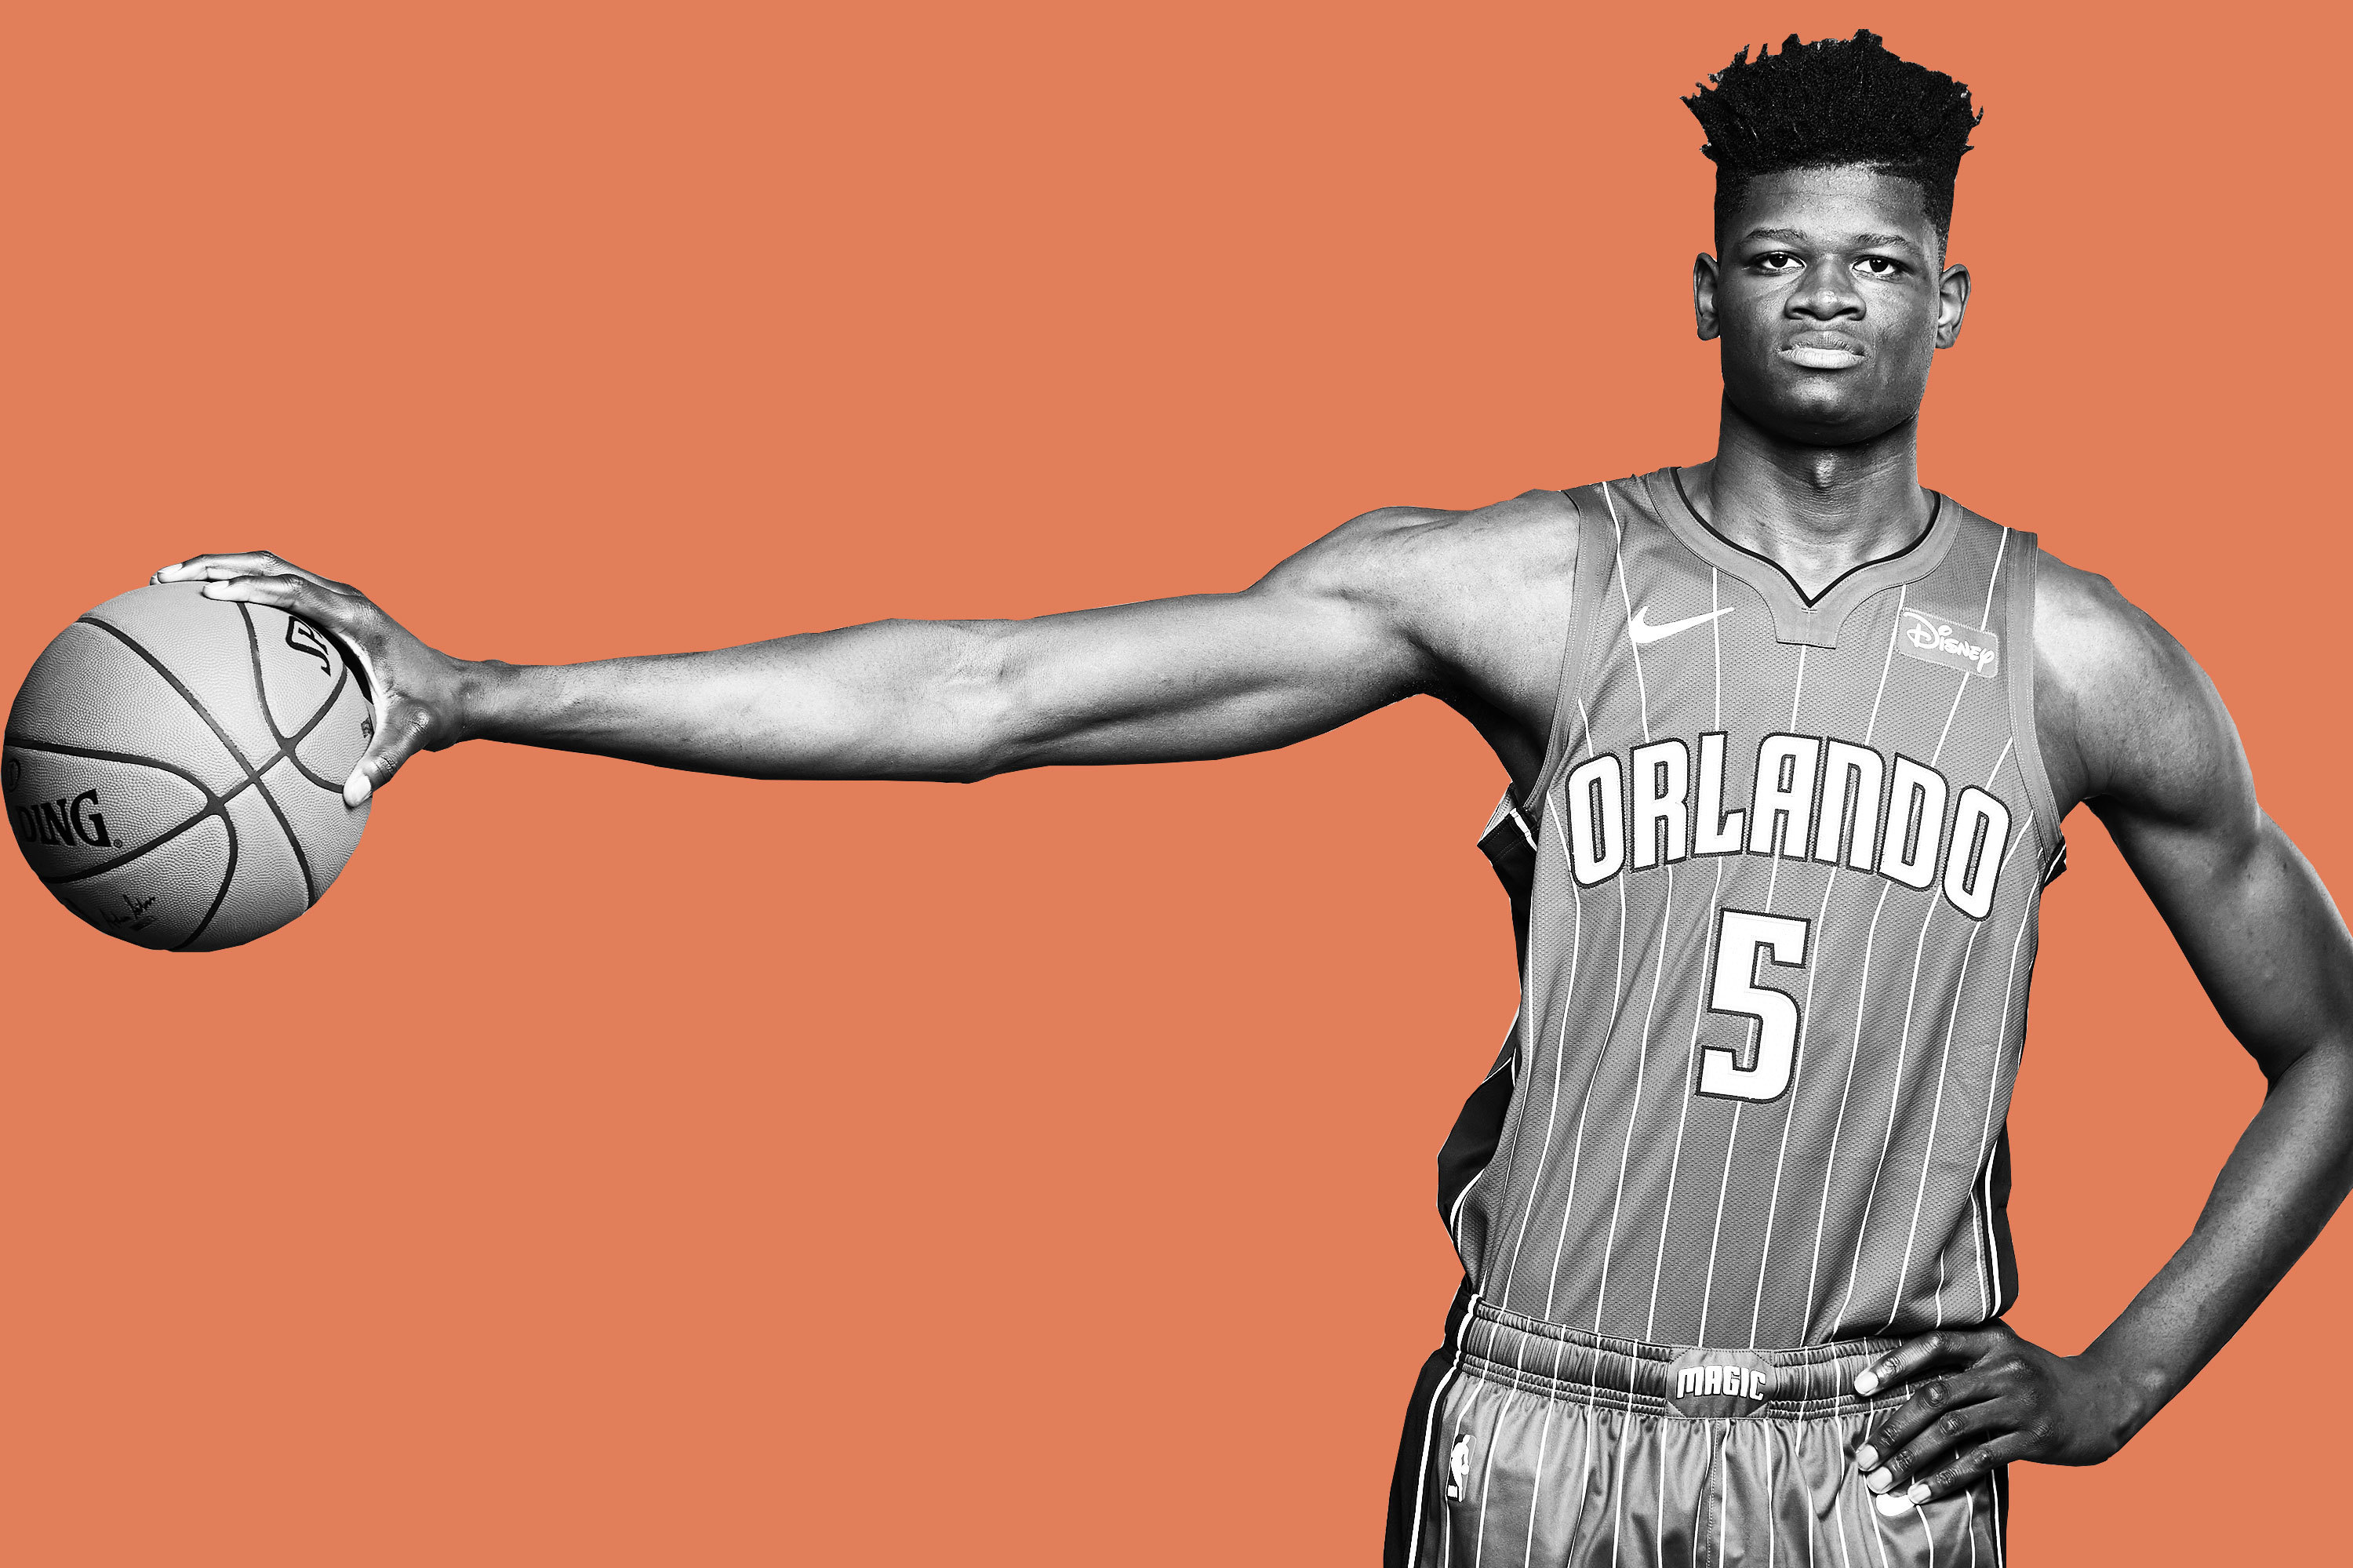 BBC World Service - Sportshour, NBA's Mo Bamba on making a difference in  Africa